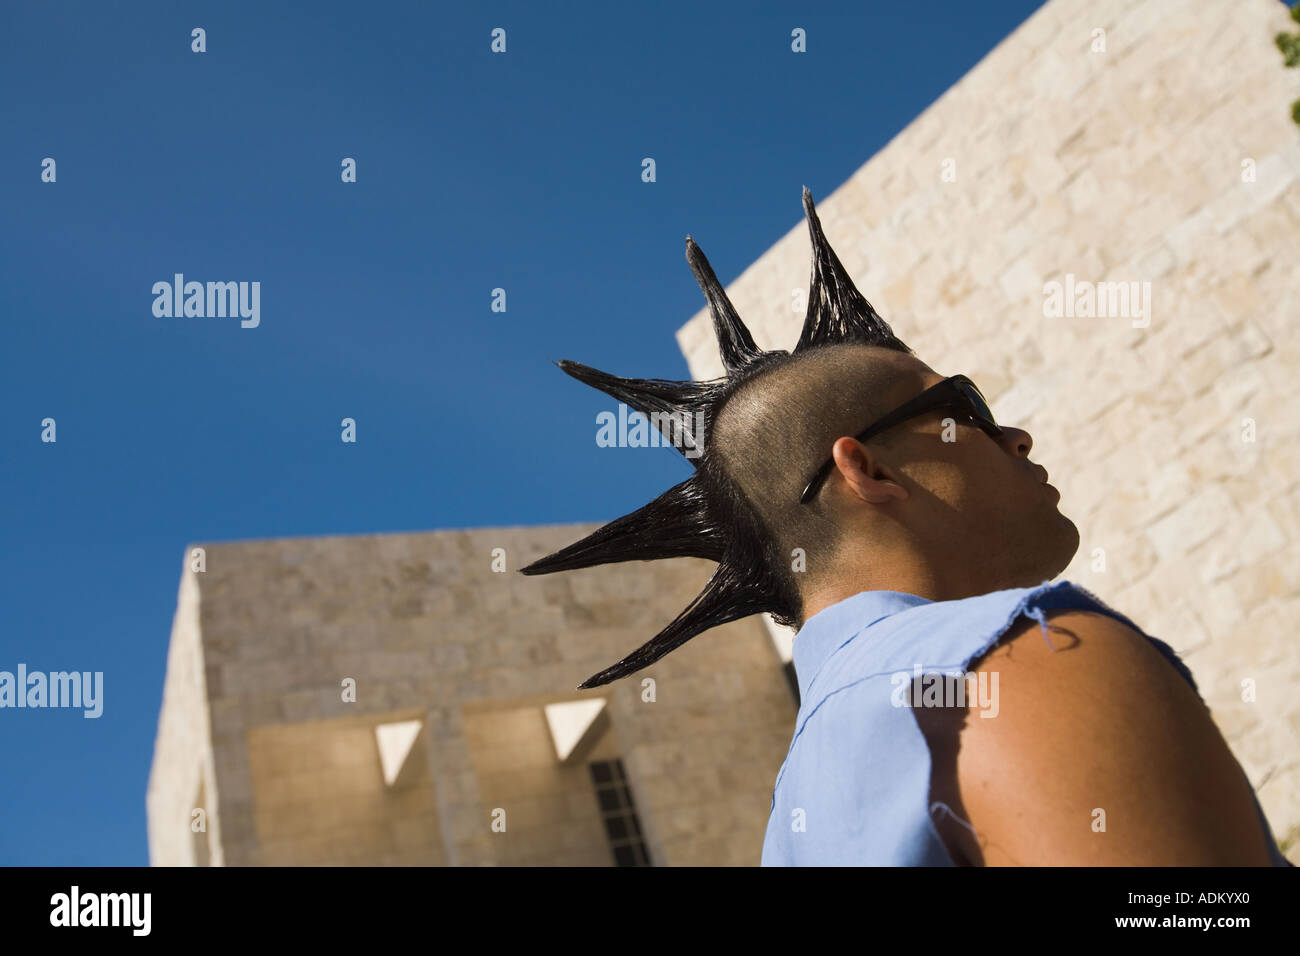 Spiked Hair Getty Center Brentwood Los Angeles California United States of America Stock Photo